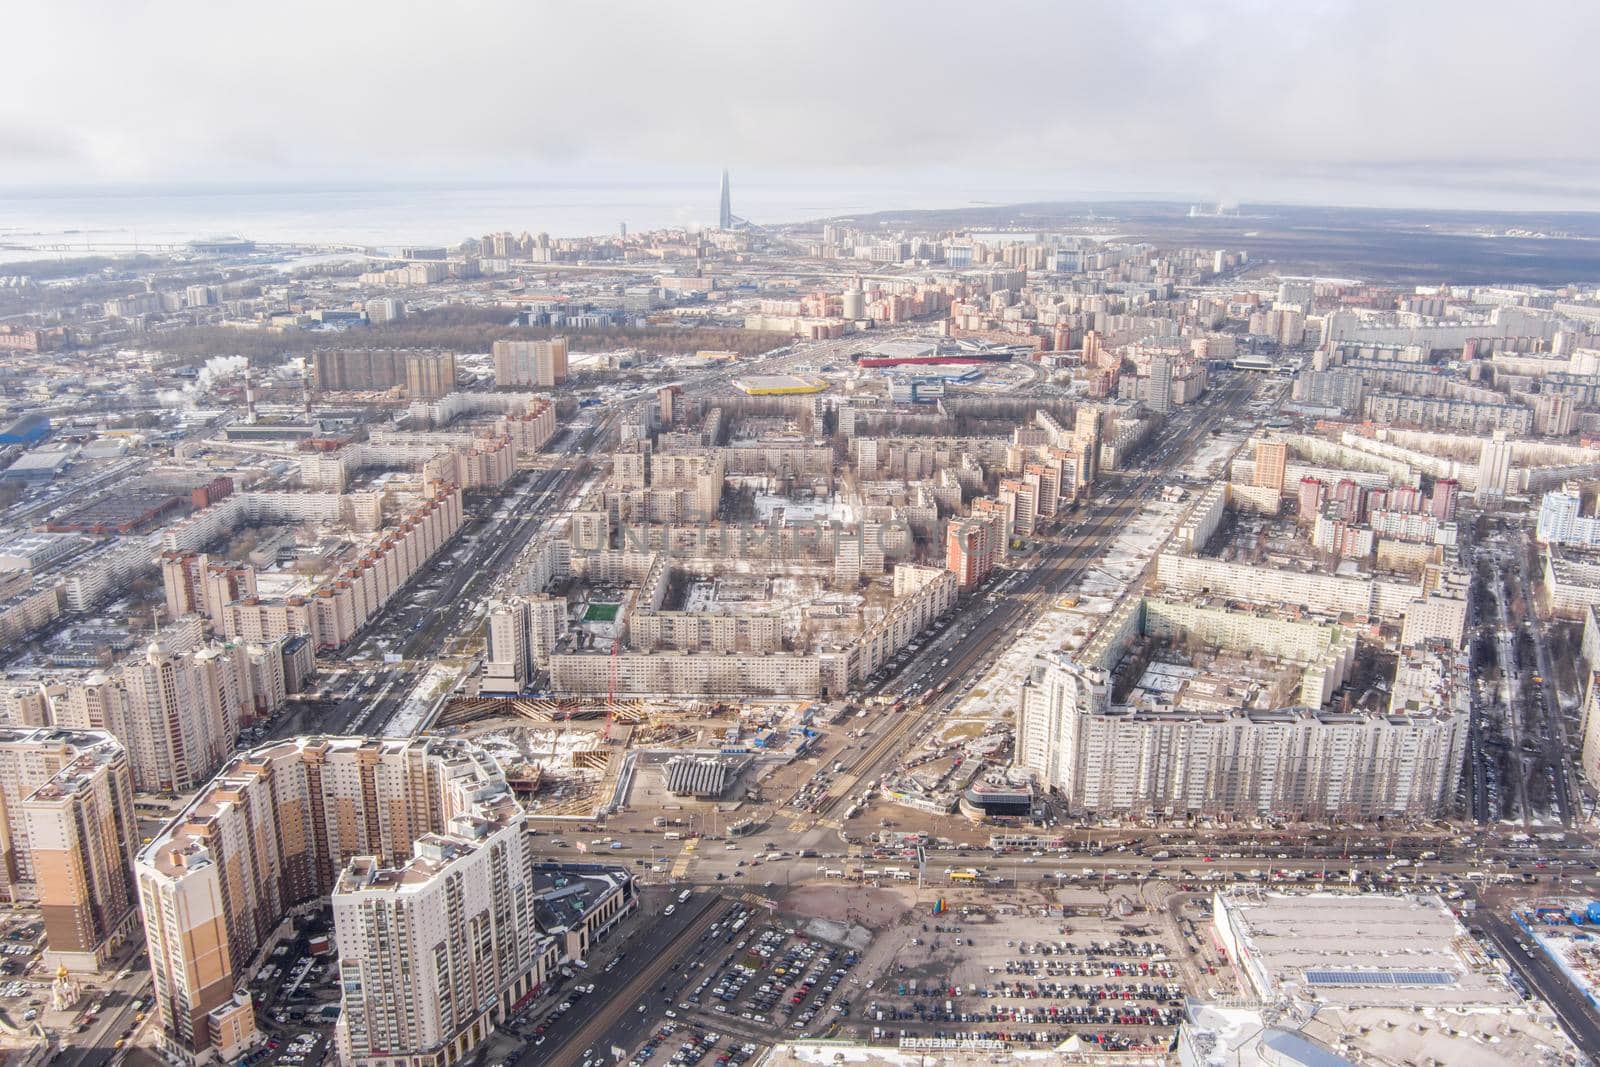 Russia, St.Petersburg, 03 March 2021: The Aerial view of the huge crossroad at subway station Pioneerskaya, Ispytateley Avenue and Kolomyazhsky, huge houses, developing shopping center, car parking by vladimirdrozdin